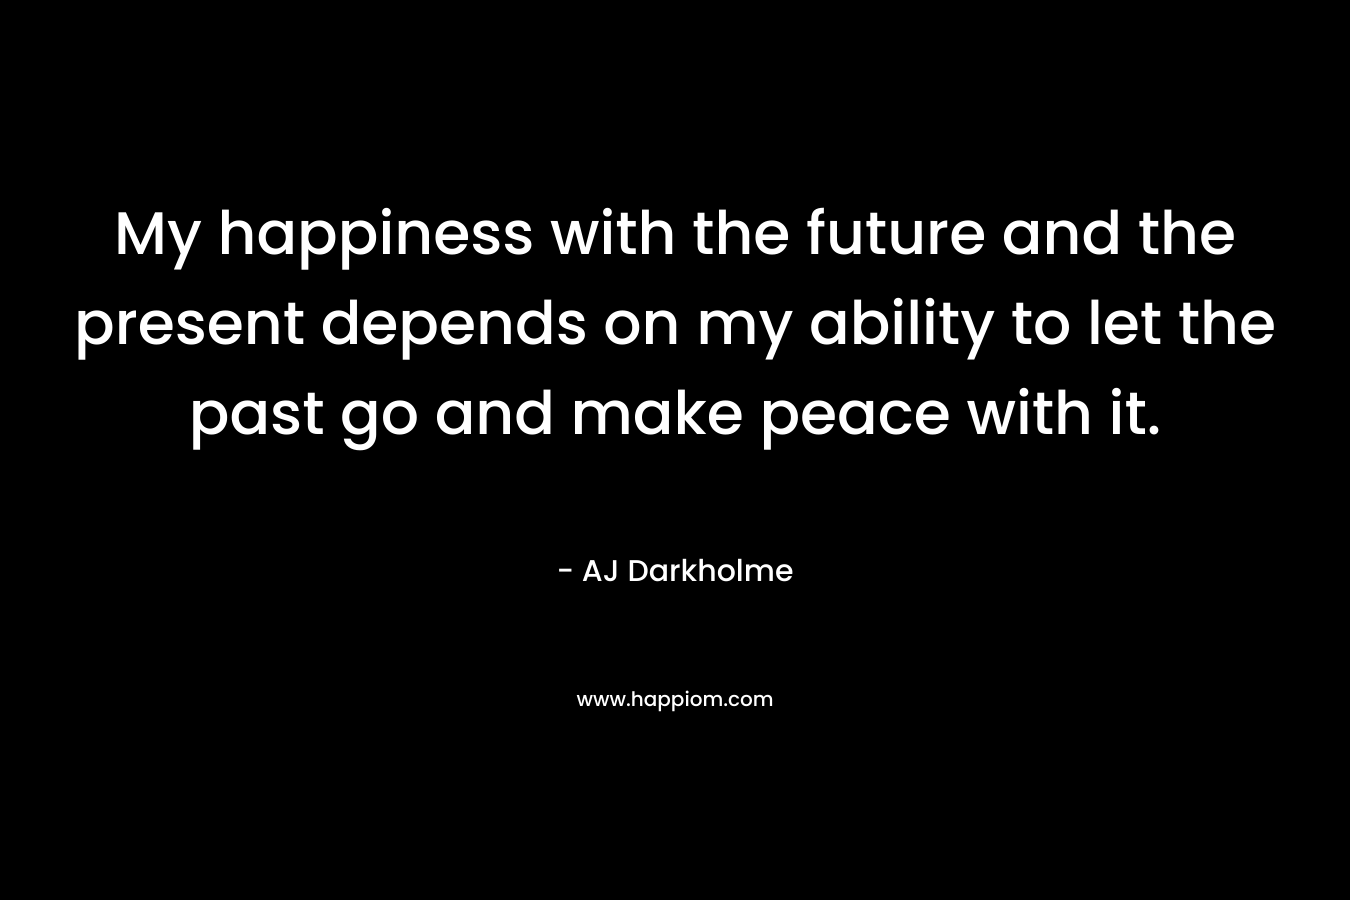 My happiness with the future and the present depends on my ability to let the past go and make peace with it.